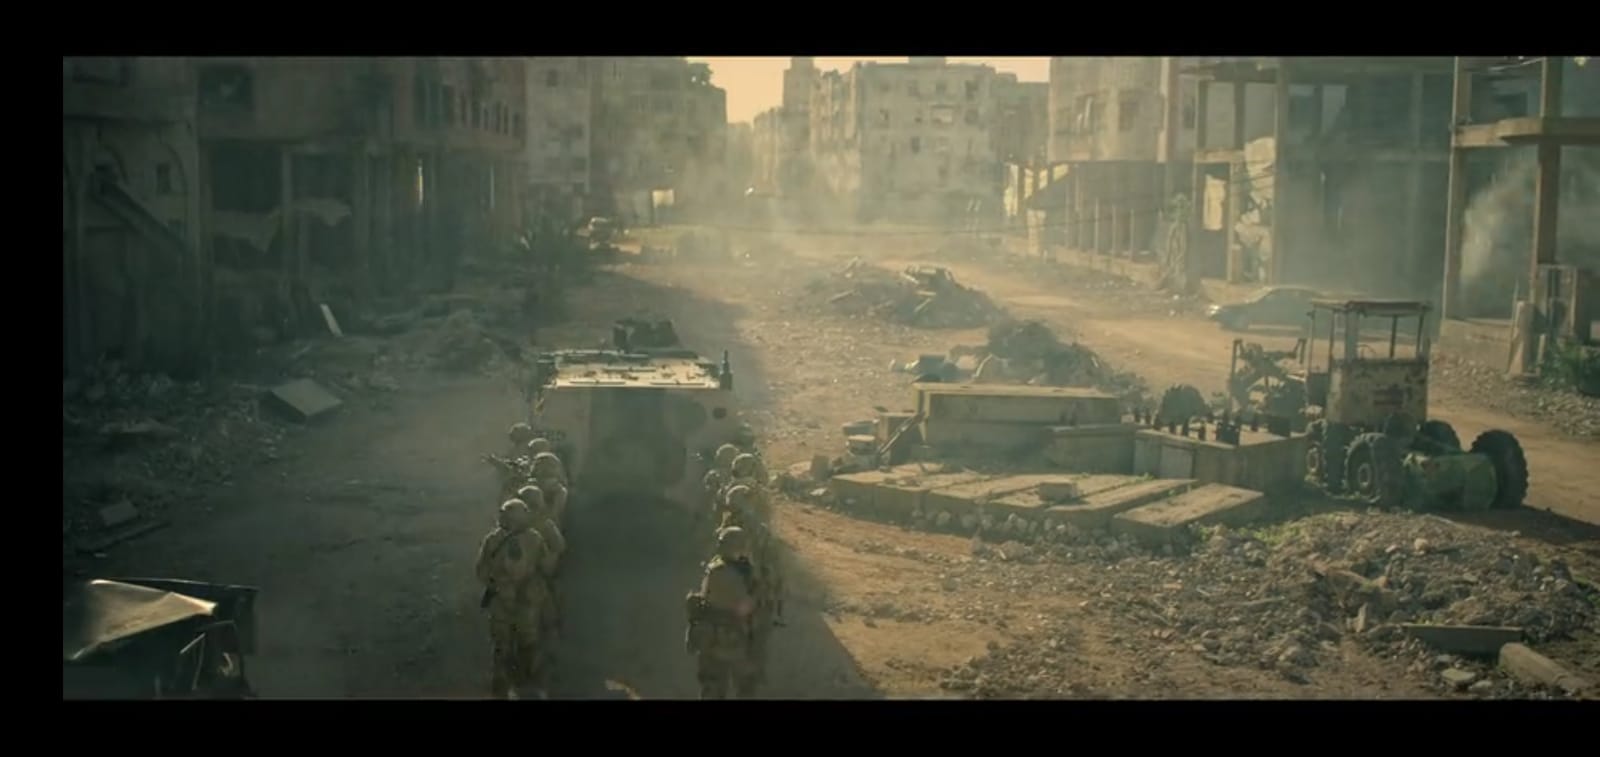 Les FAR et le Cinema / Moroccan Armed Forces in Movies - Page 11 510